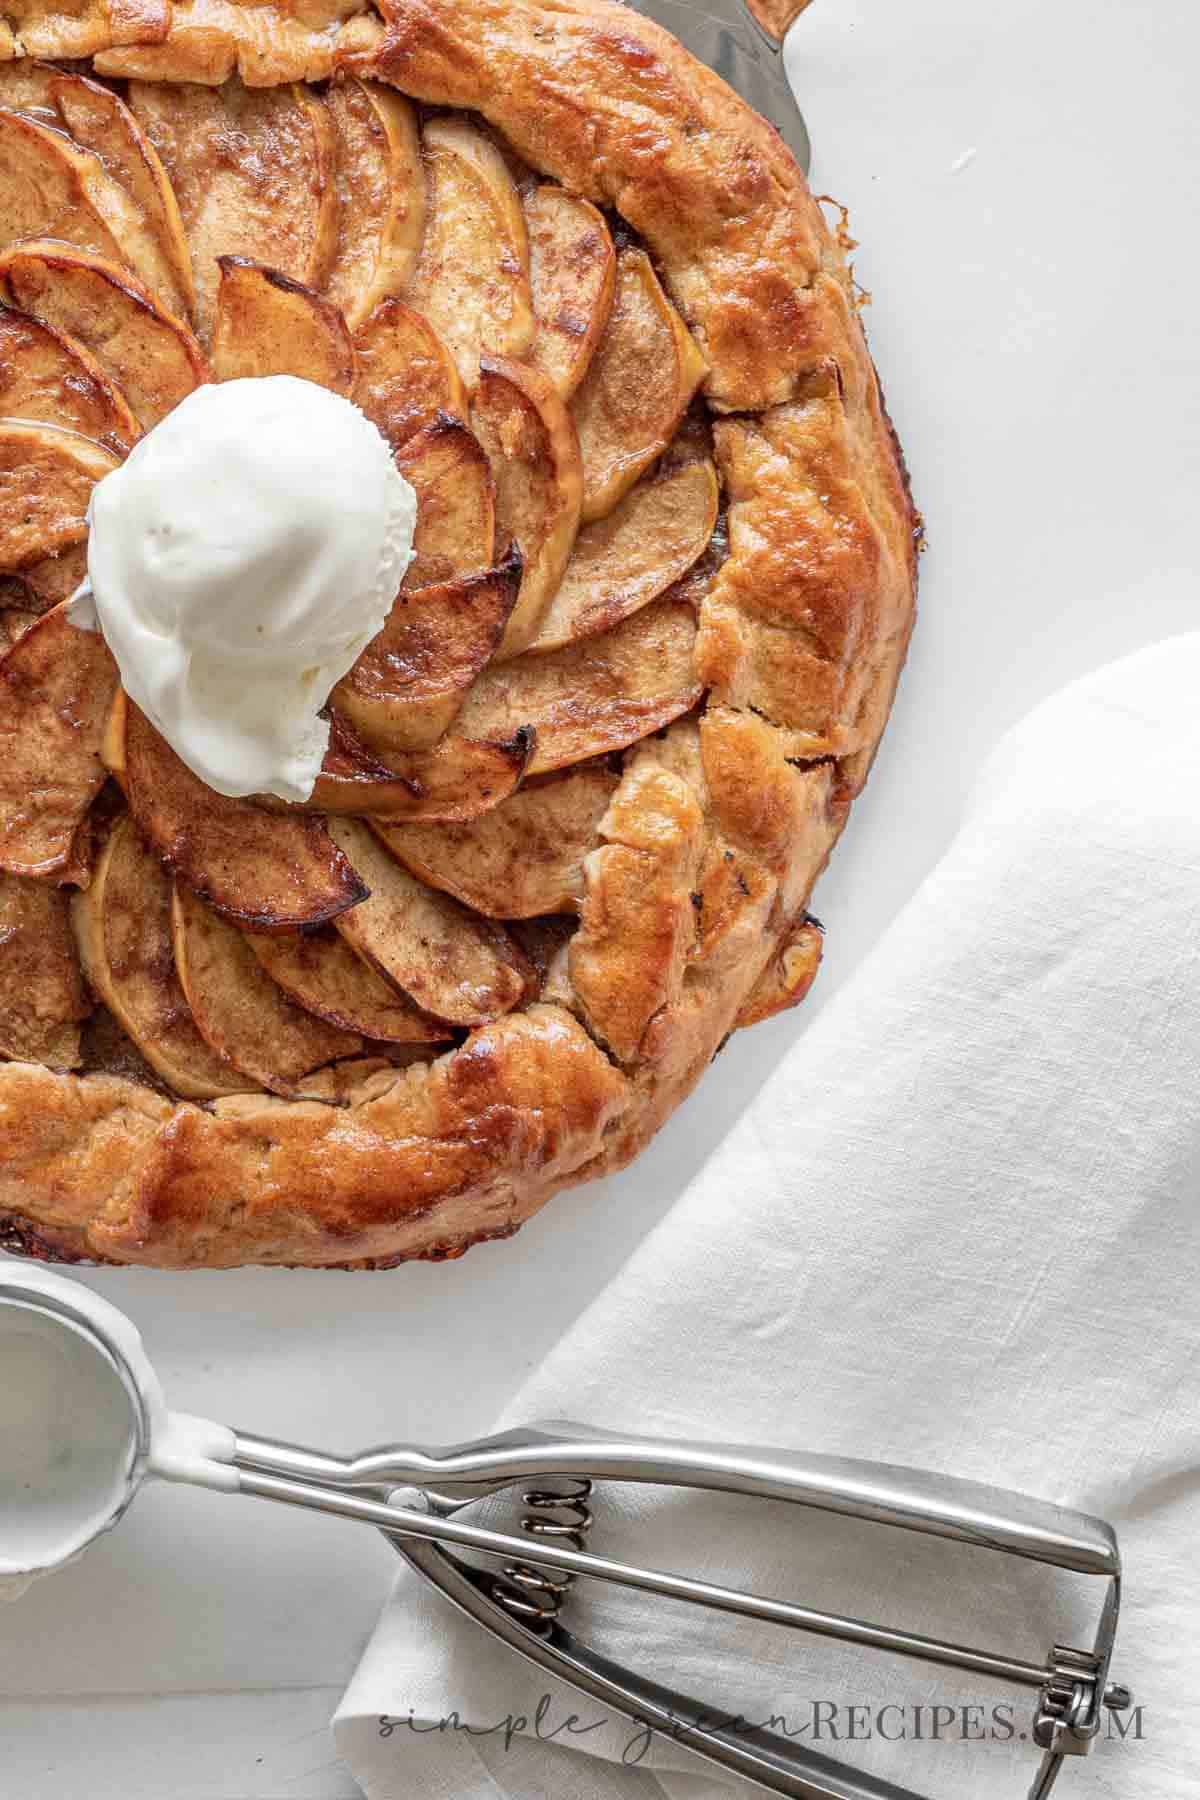 half apple galette toped with ice cream, a napkin and an ice cream server